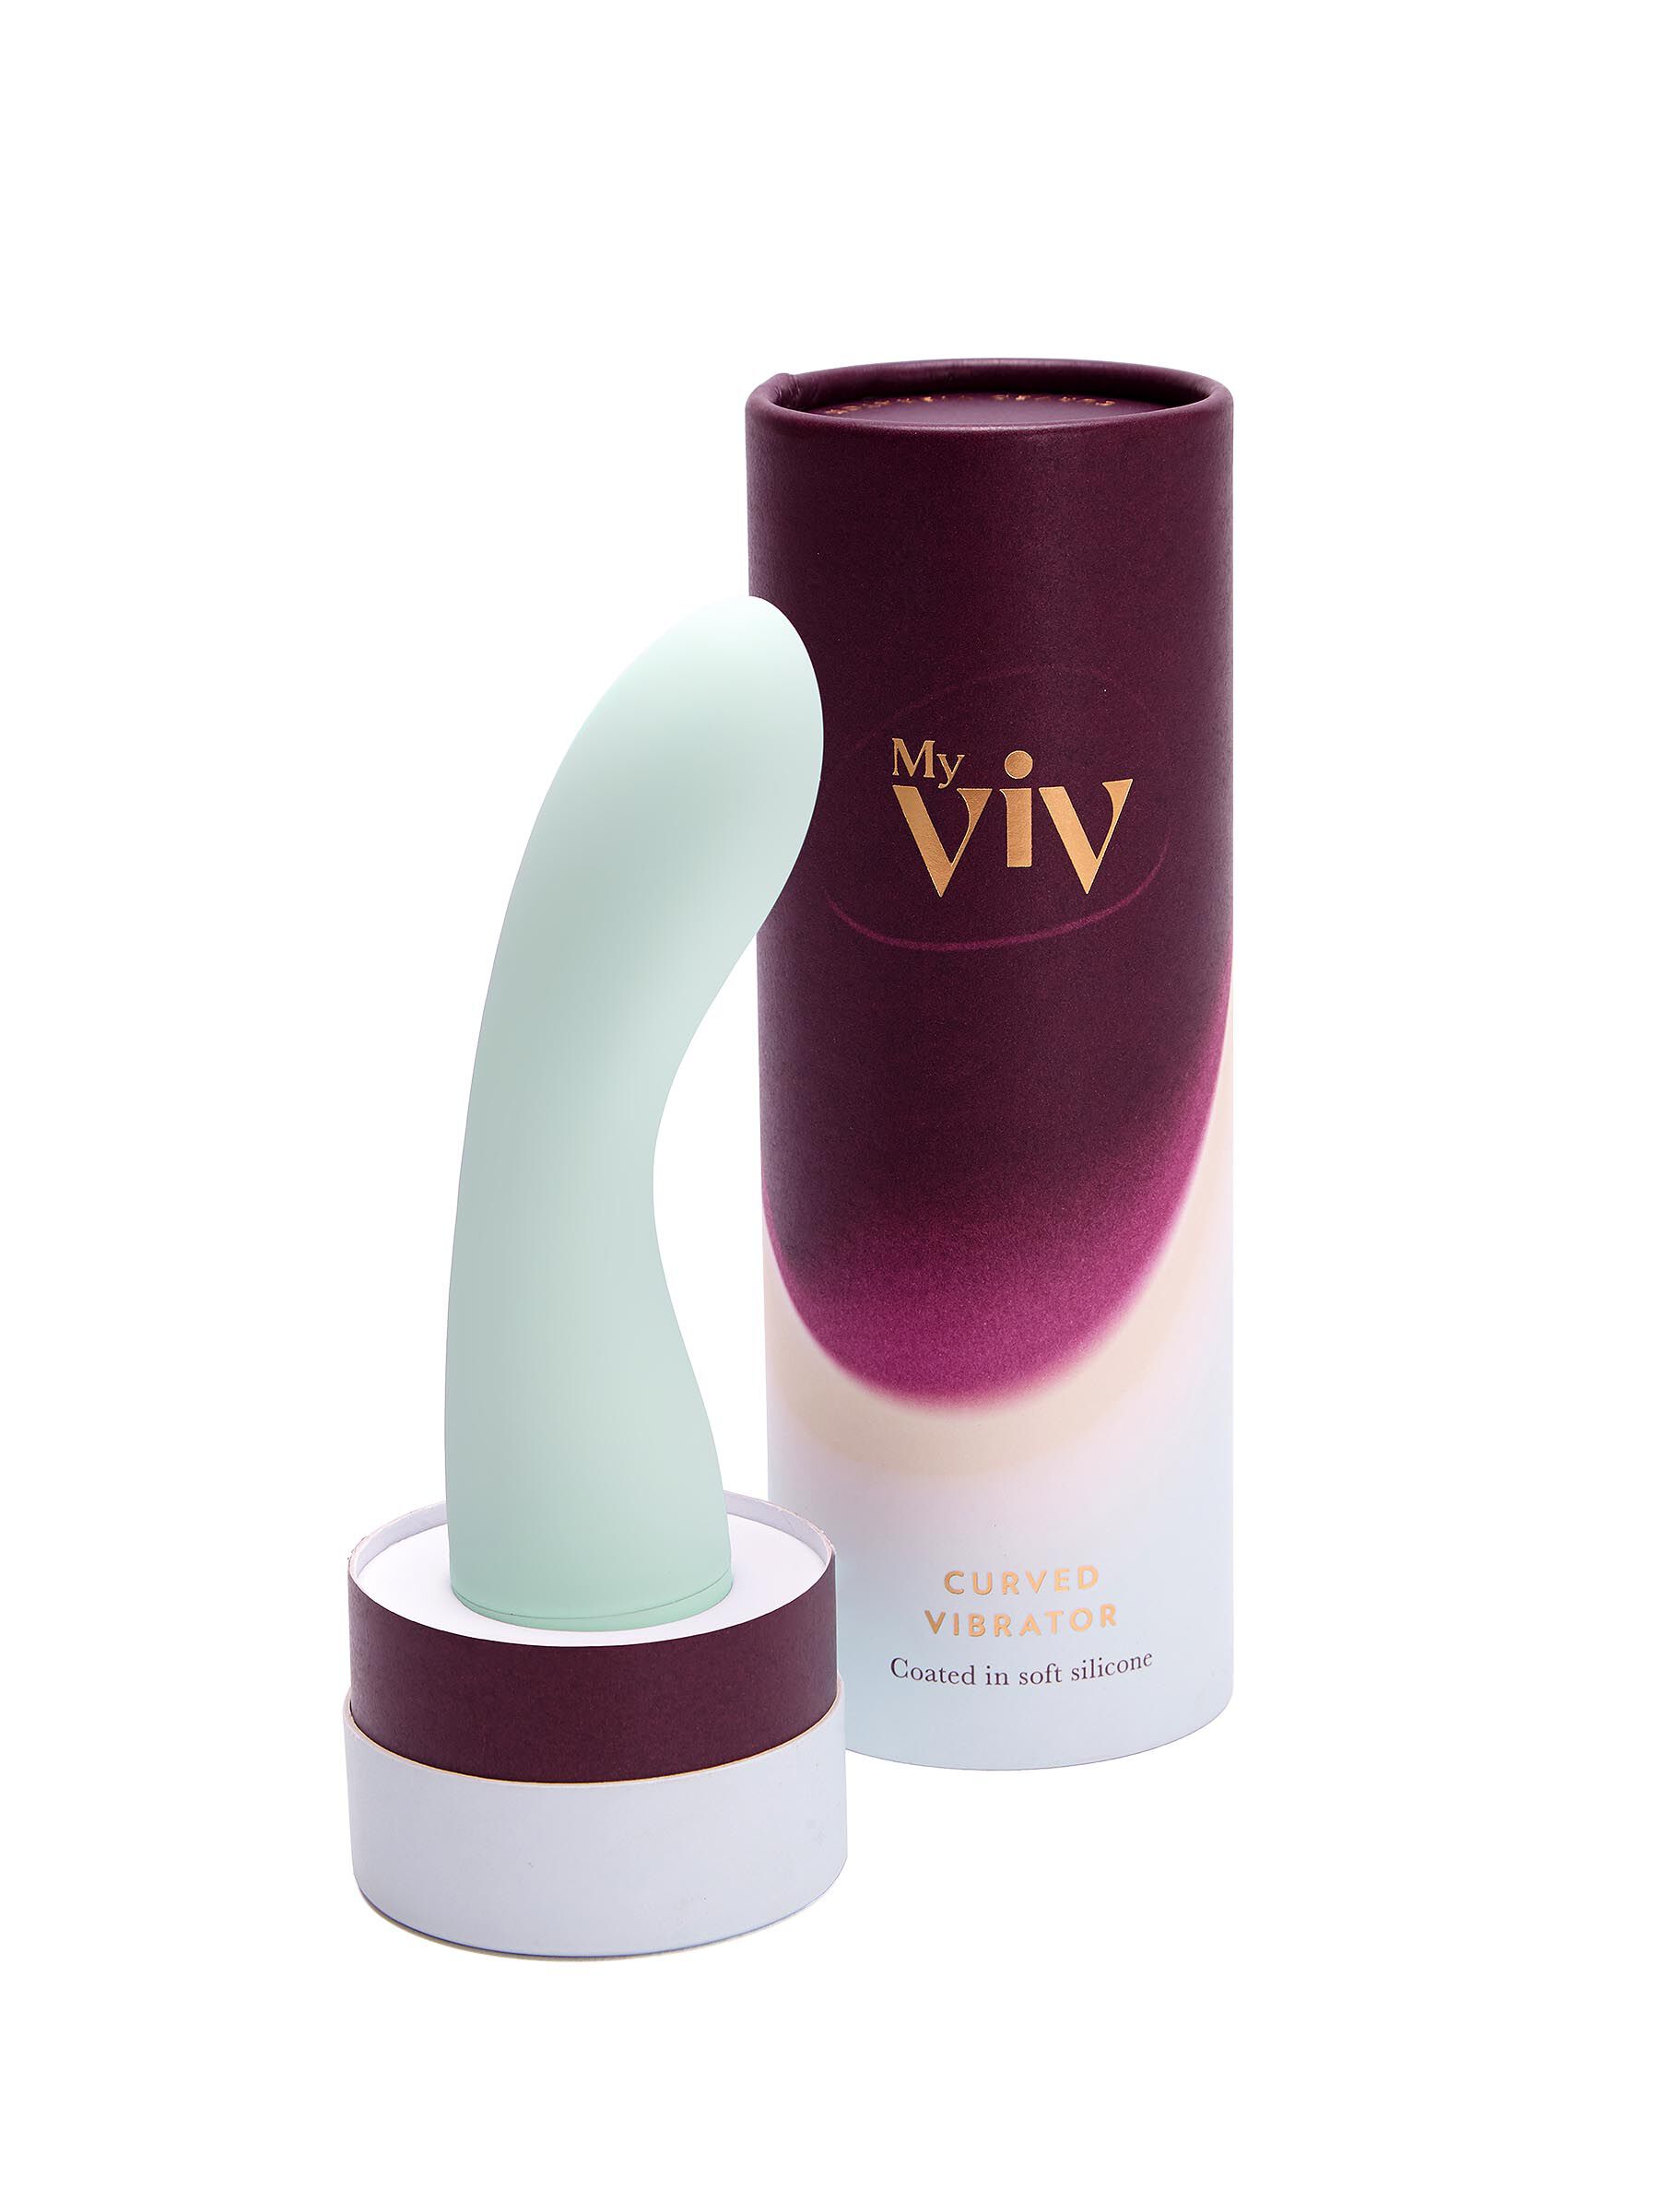 Made with soft, body-safe silicone, this 5'' Curved Vibrator is ergonomically designed to target the G-spot area. There are four speed settings and three pulse patterns for you to explore, so you can find what works best for you. Use with our My Viv lubricants, alone or with your partner.